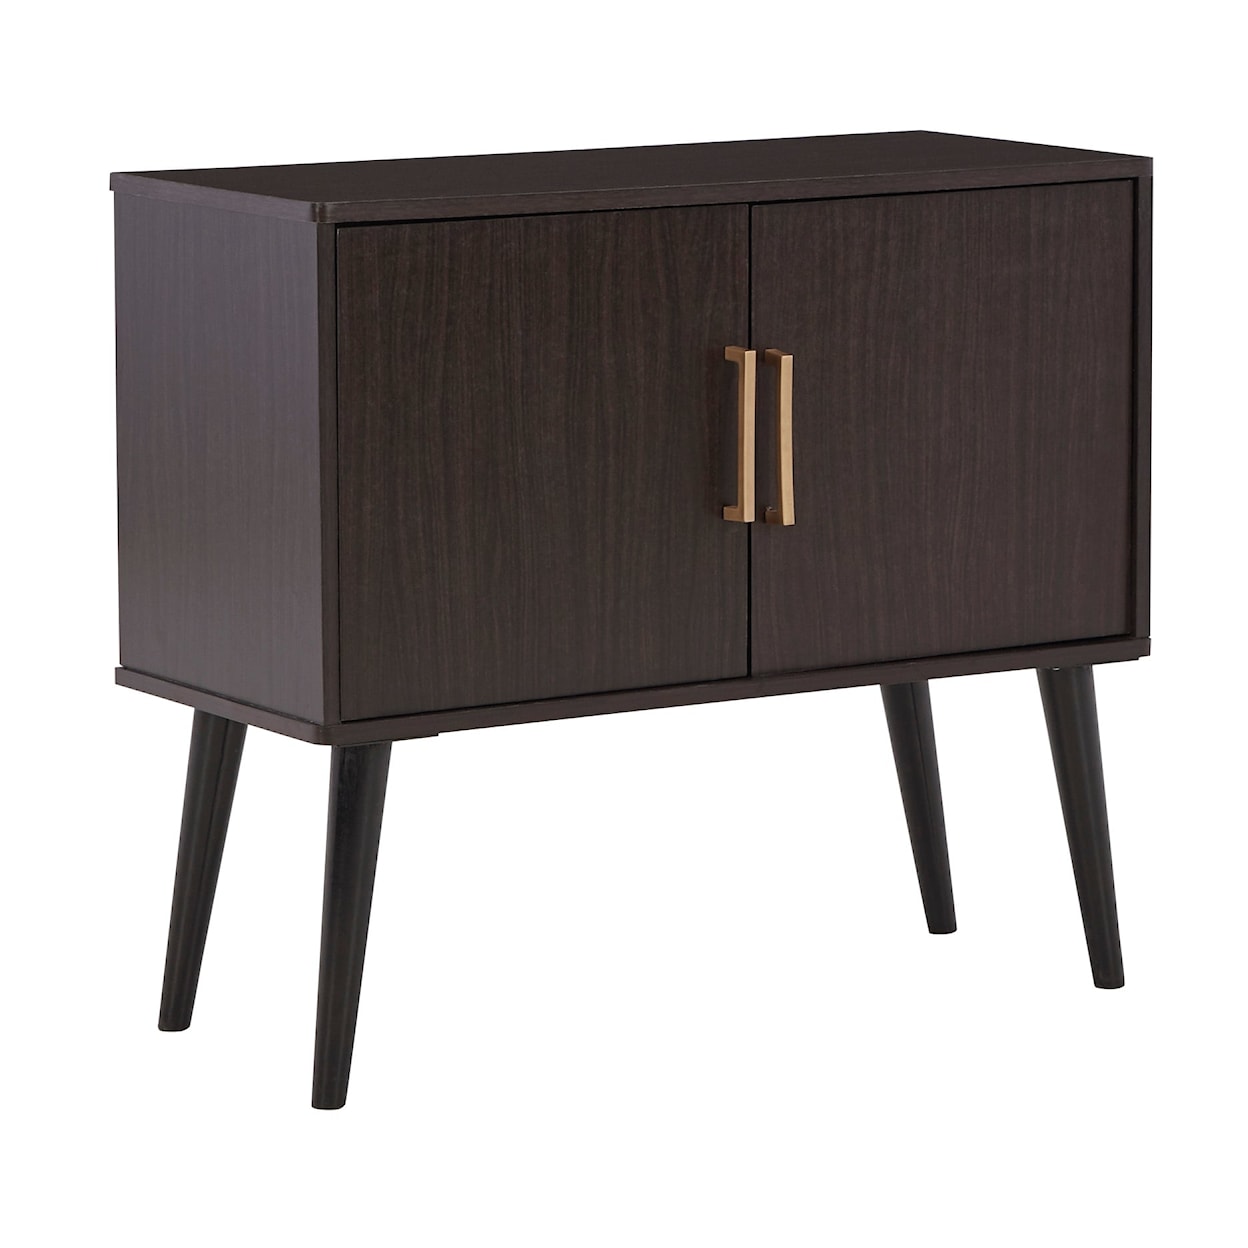 Signature Design by Ashley Orinfield Accent Cabinet